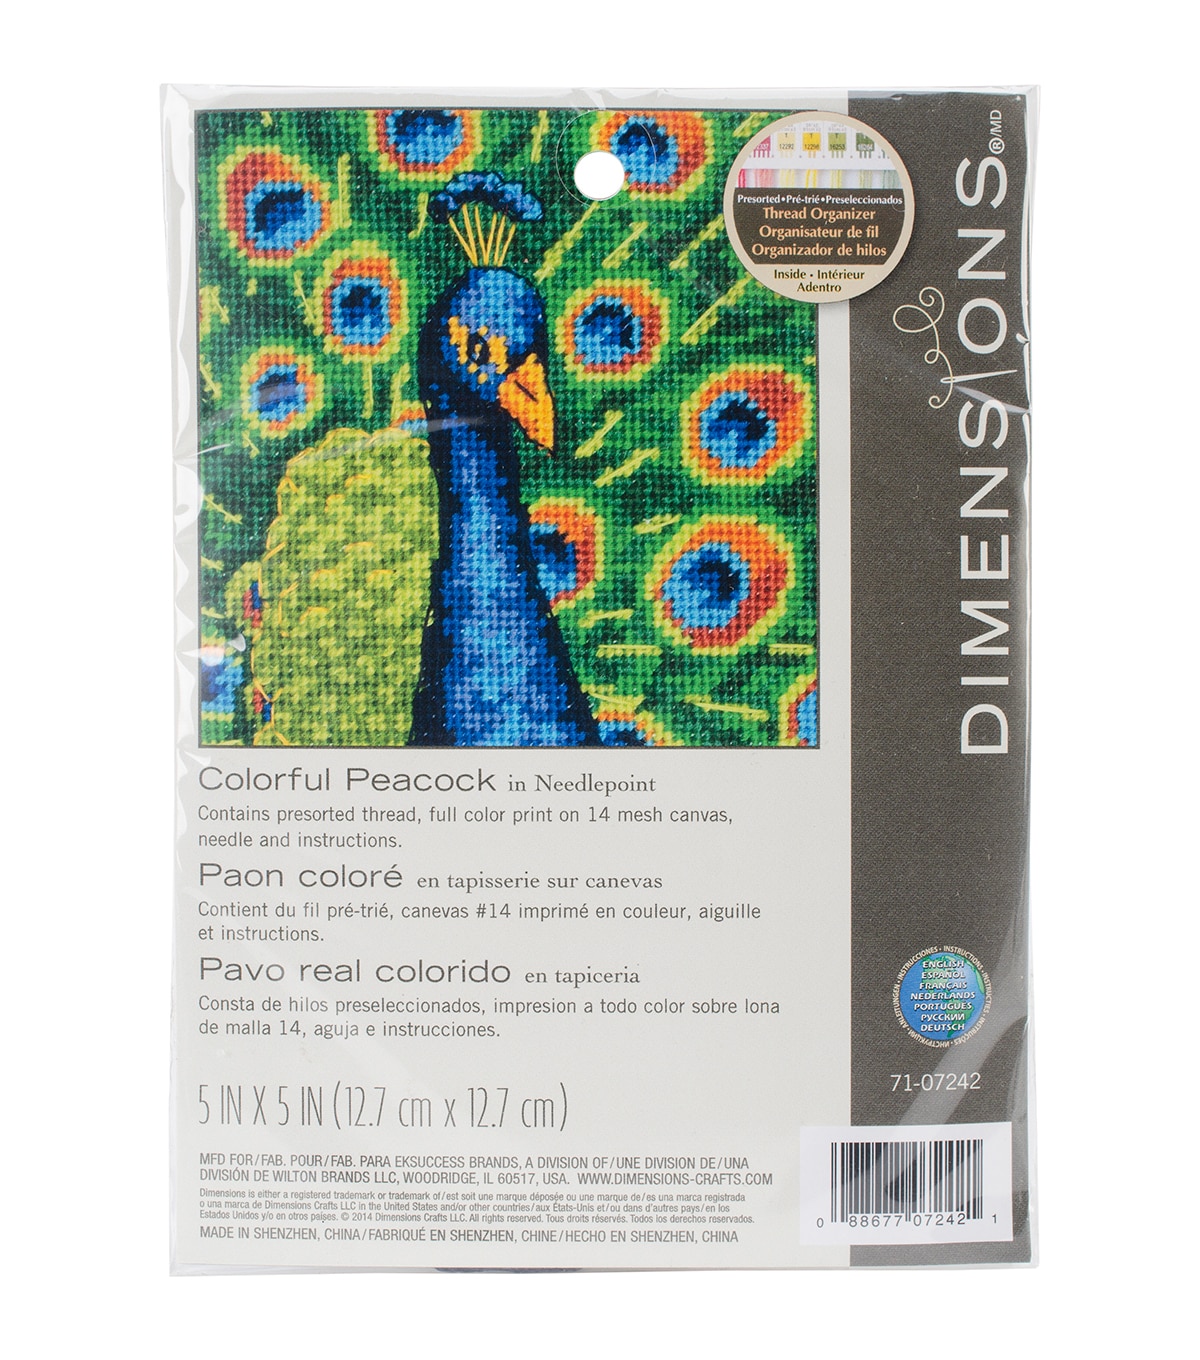 Clover 235 No. 3-9 Gold Eye Embroidery Needles, Pack of 16